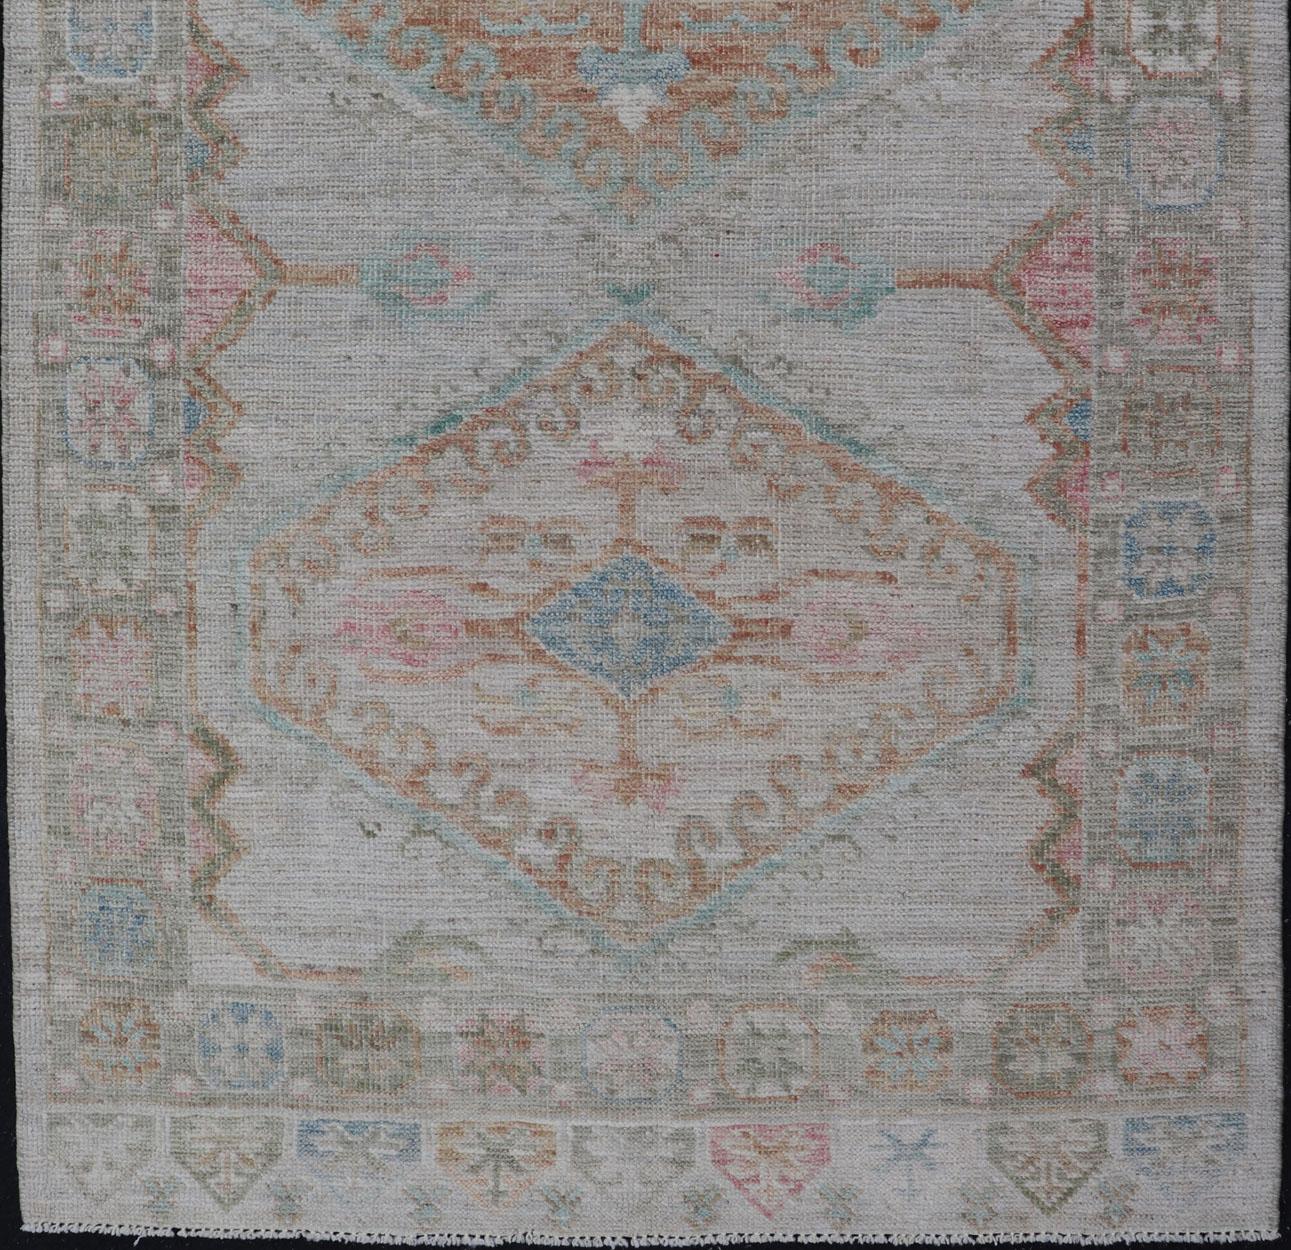 Measures: 3'3 x 5'2 
Modern Oushak in Light Cream Background With Copper and Green Colors. Country of Origin: Afghanistan  Type: Oushak Keivan Woven Arts; rug / AWR-12425,  Design: Floral, All-Over. 21-st Century.

The border and background of this